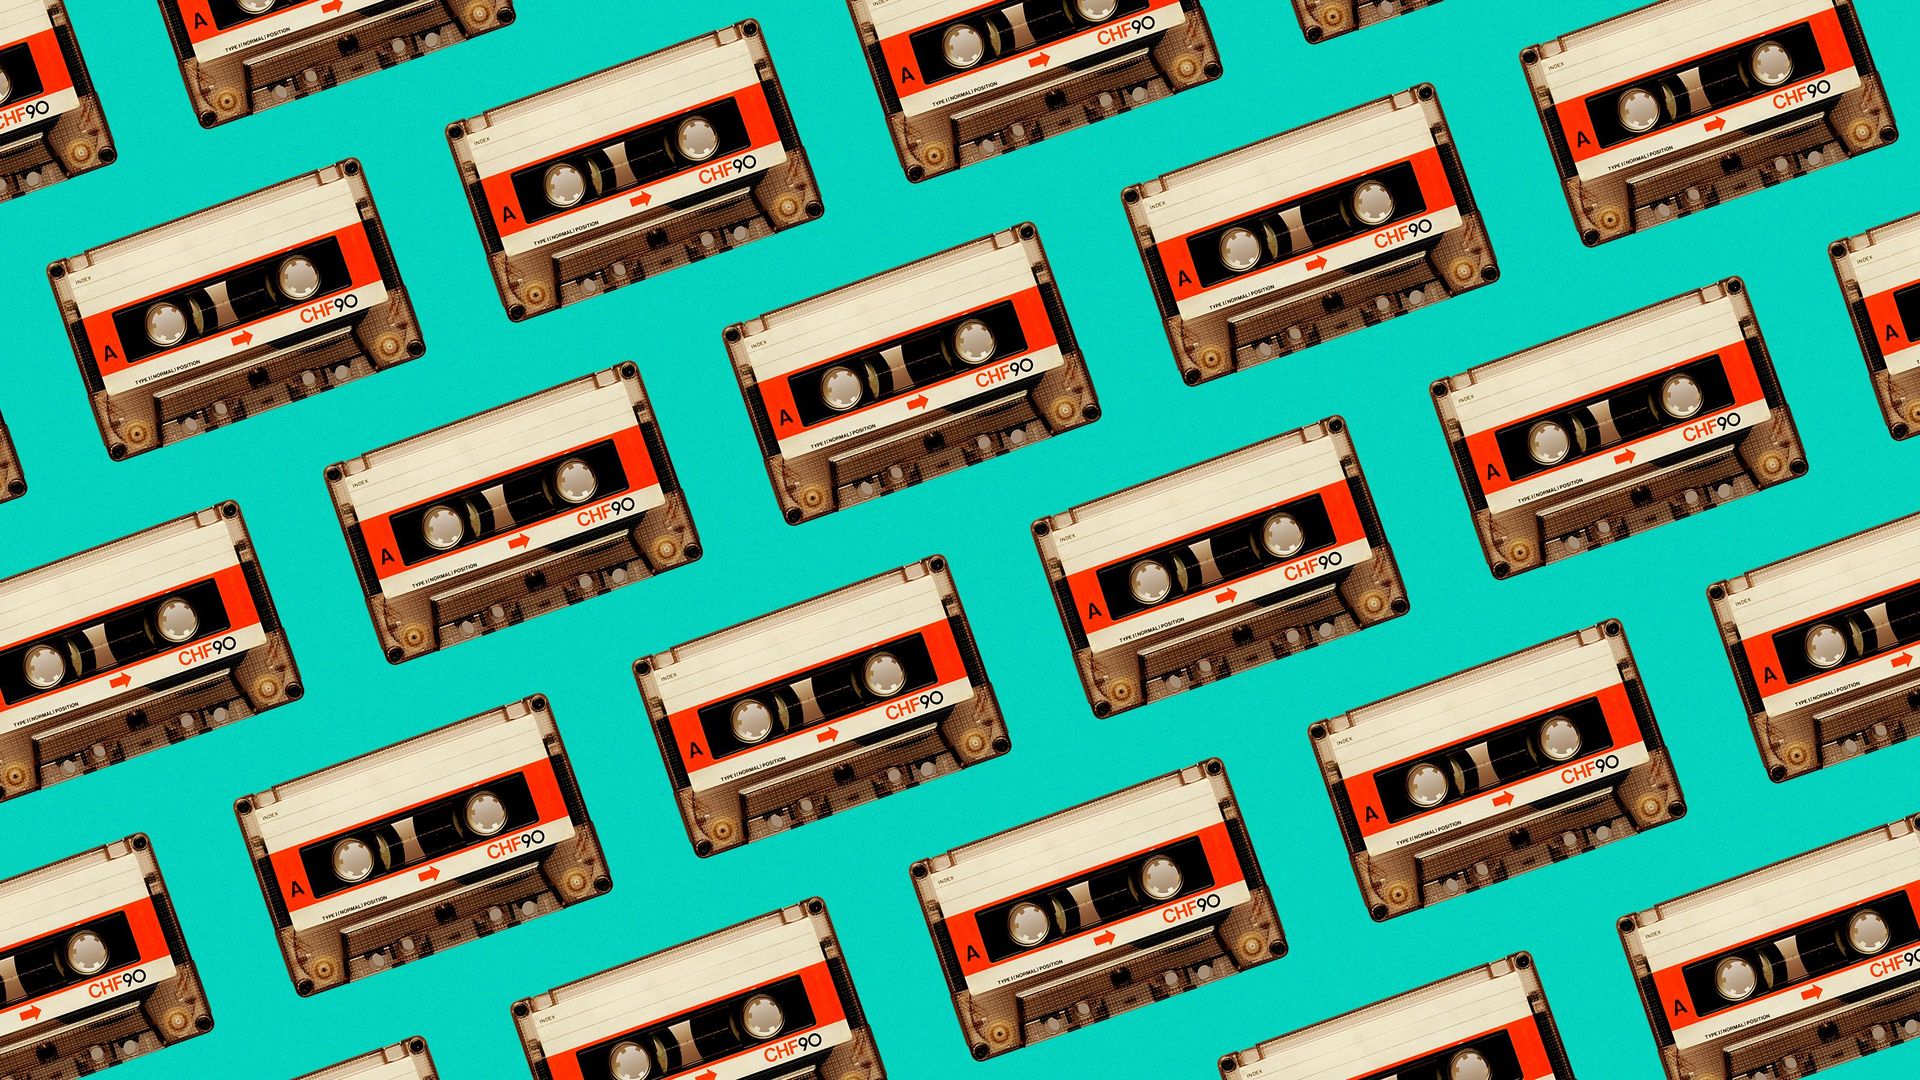 Illustration of a pattern of cassette tapes.